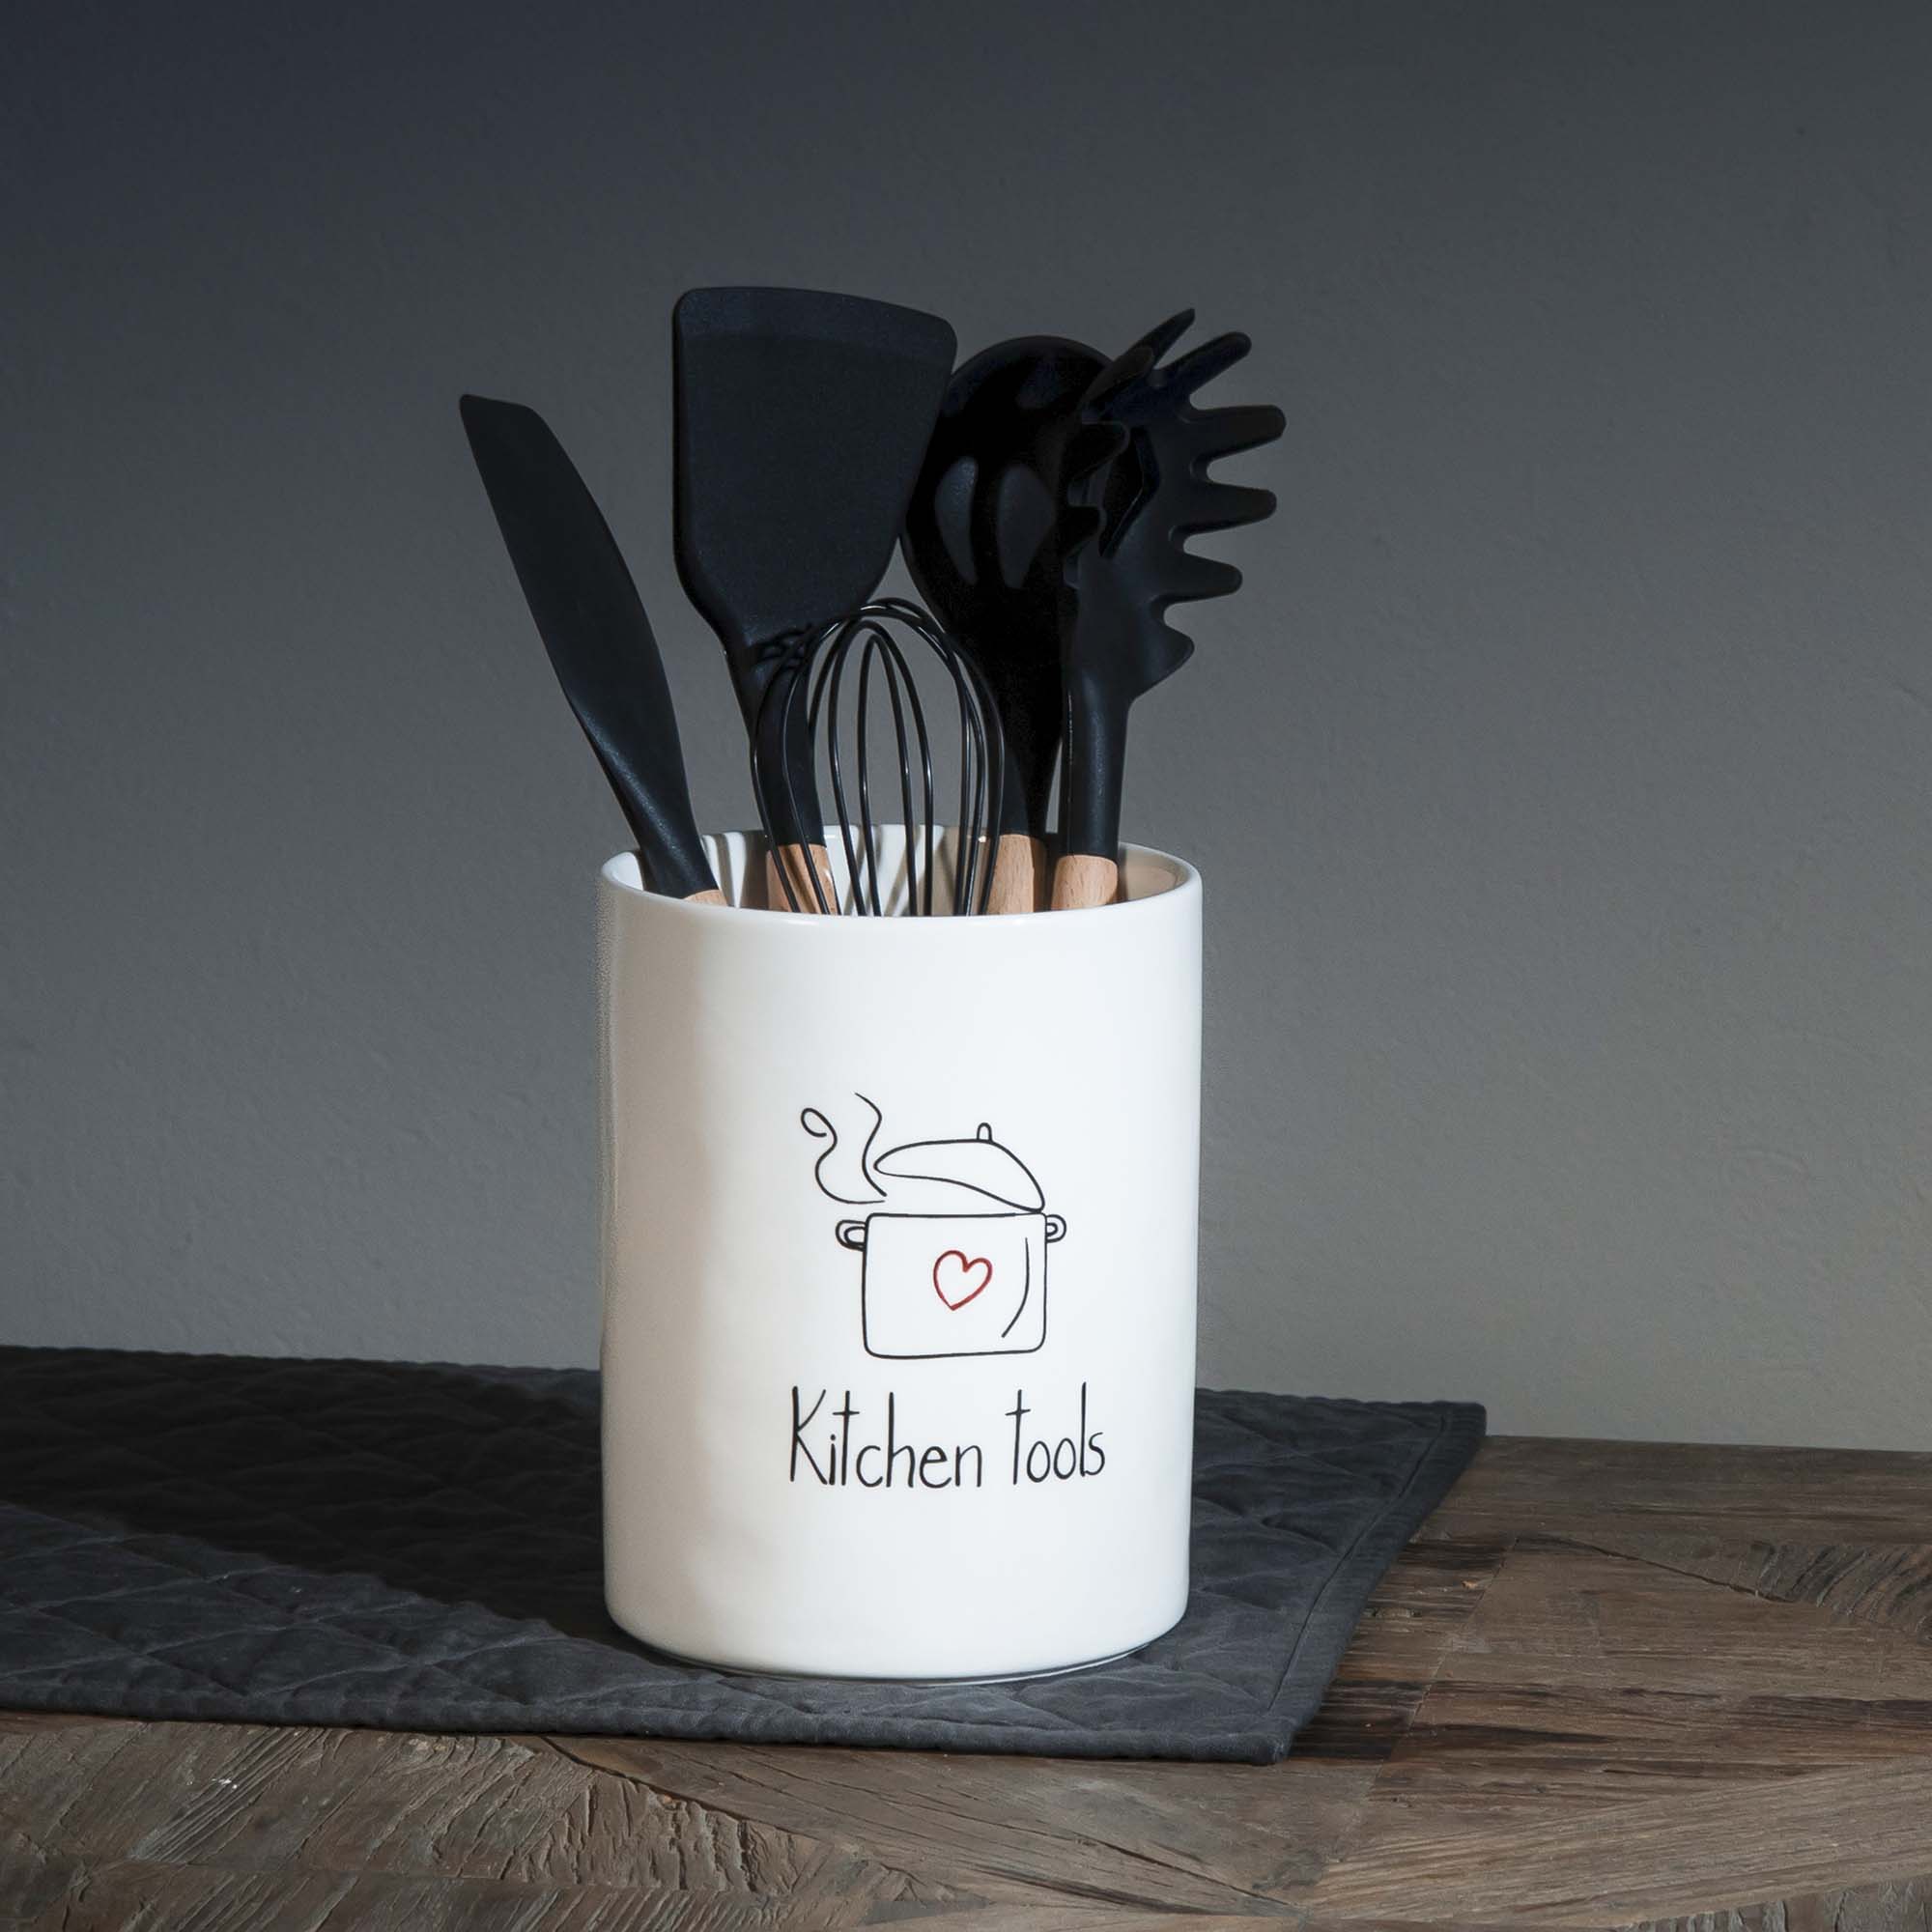 Kitchen Tools holder and cutlery